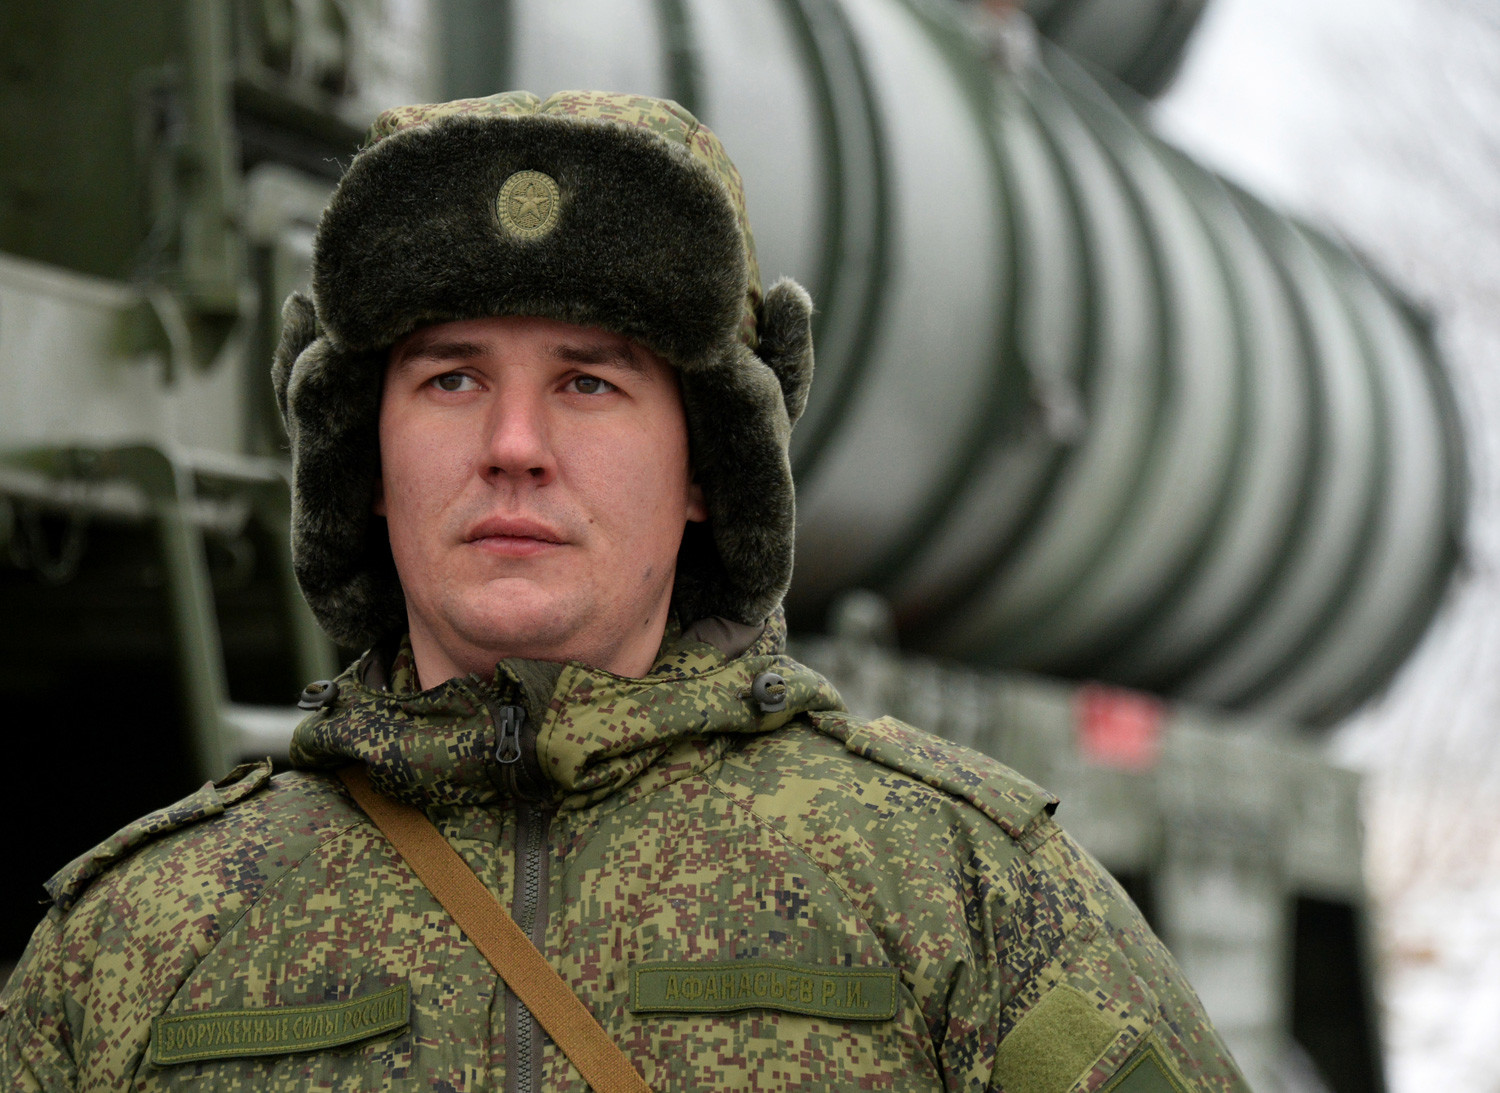 A serviceman of the Eastern Military District's Air Defense Missile System battalion on a combat duty. S-400 Triumph air defense missile systems were deployed in combat positions after a solemn ceremony of taking up a duty and started protecting air space of the Primorye Territory.